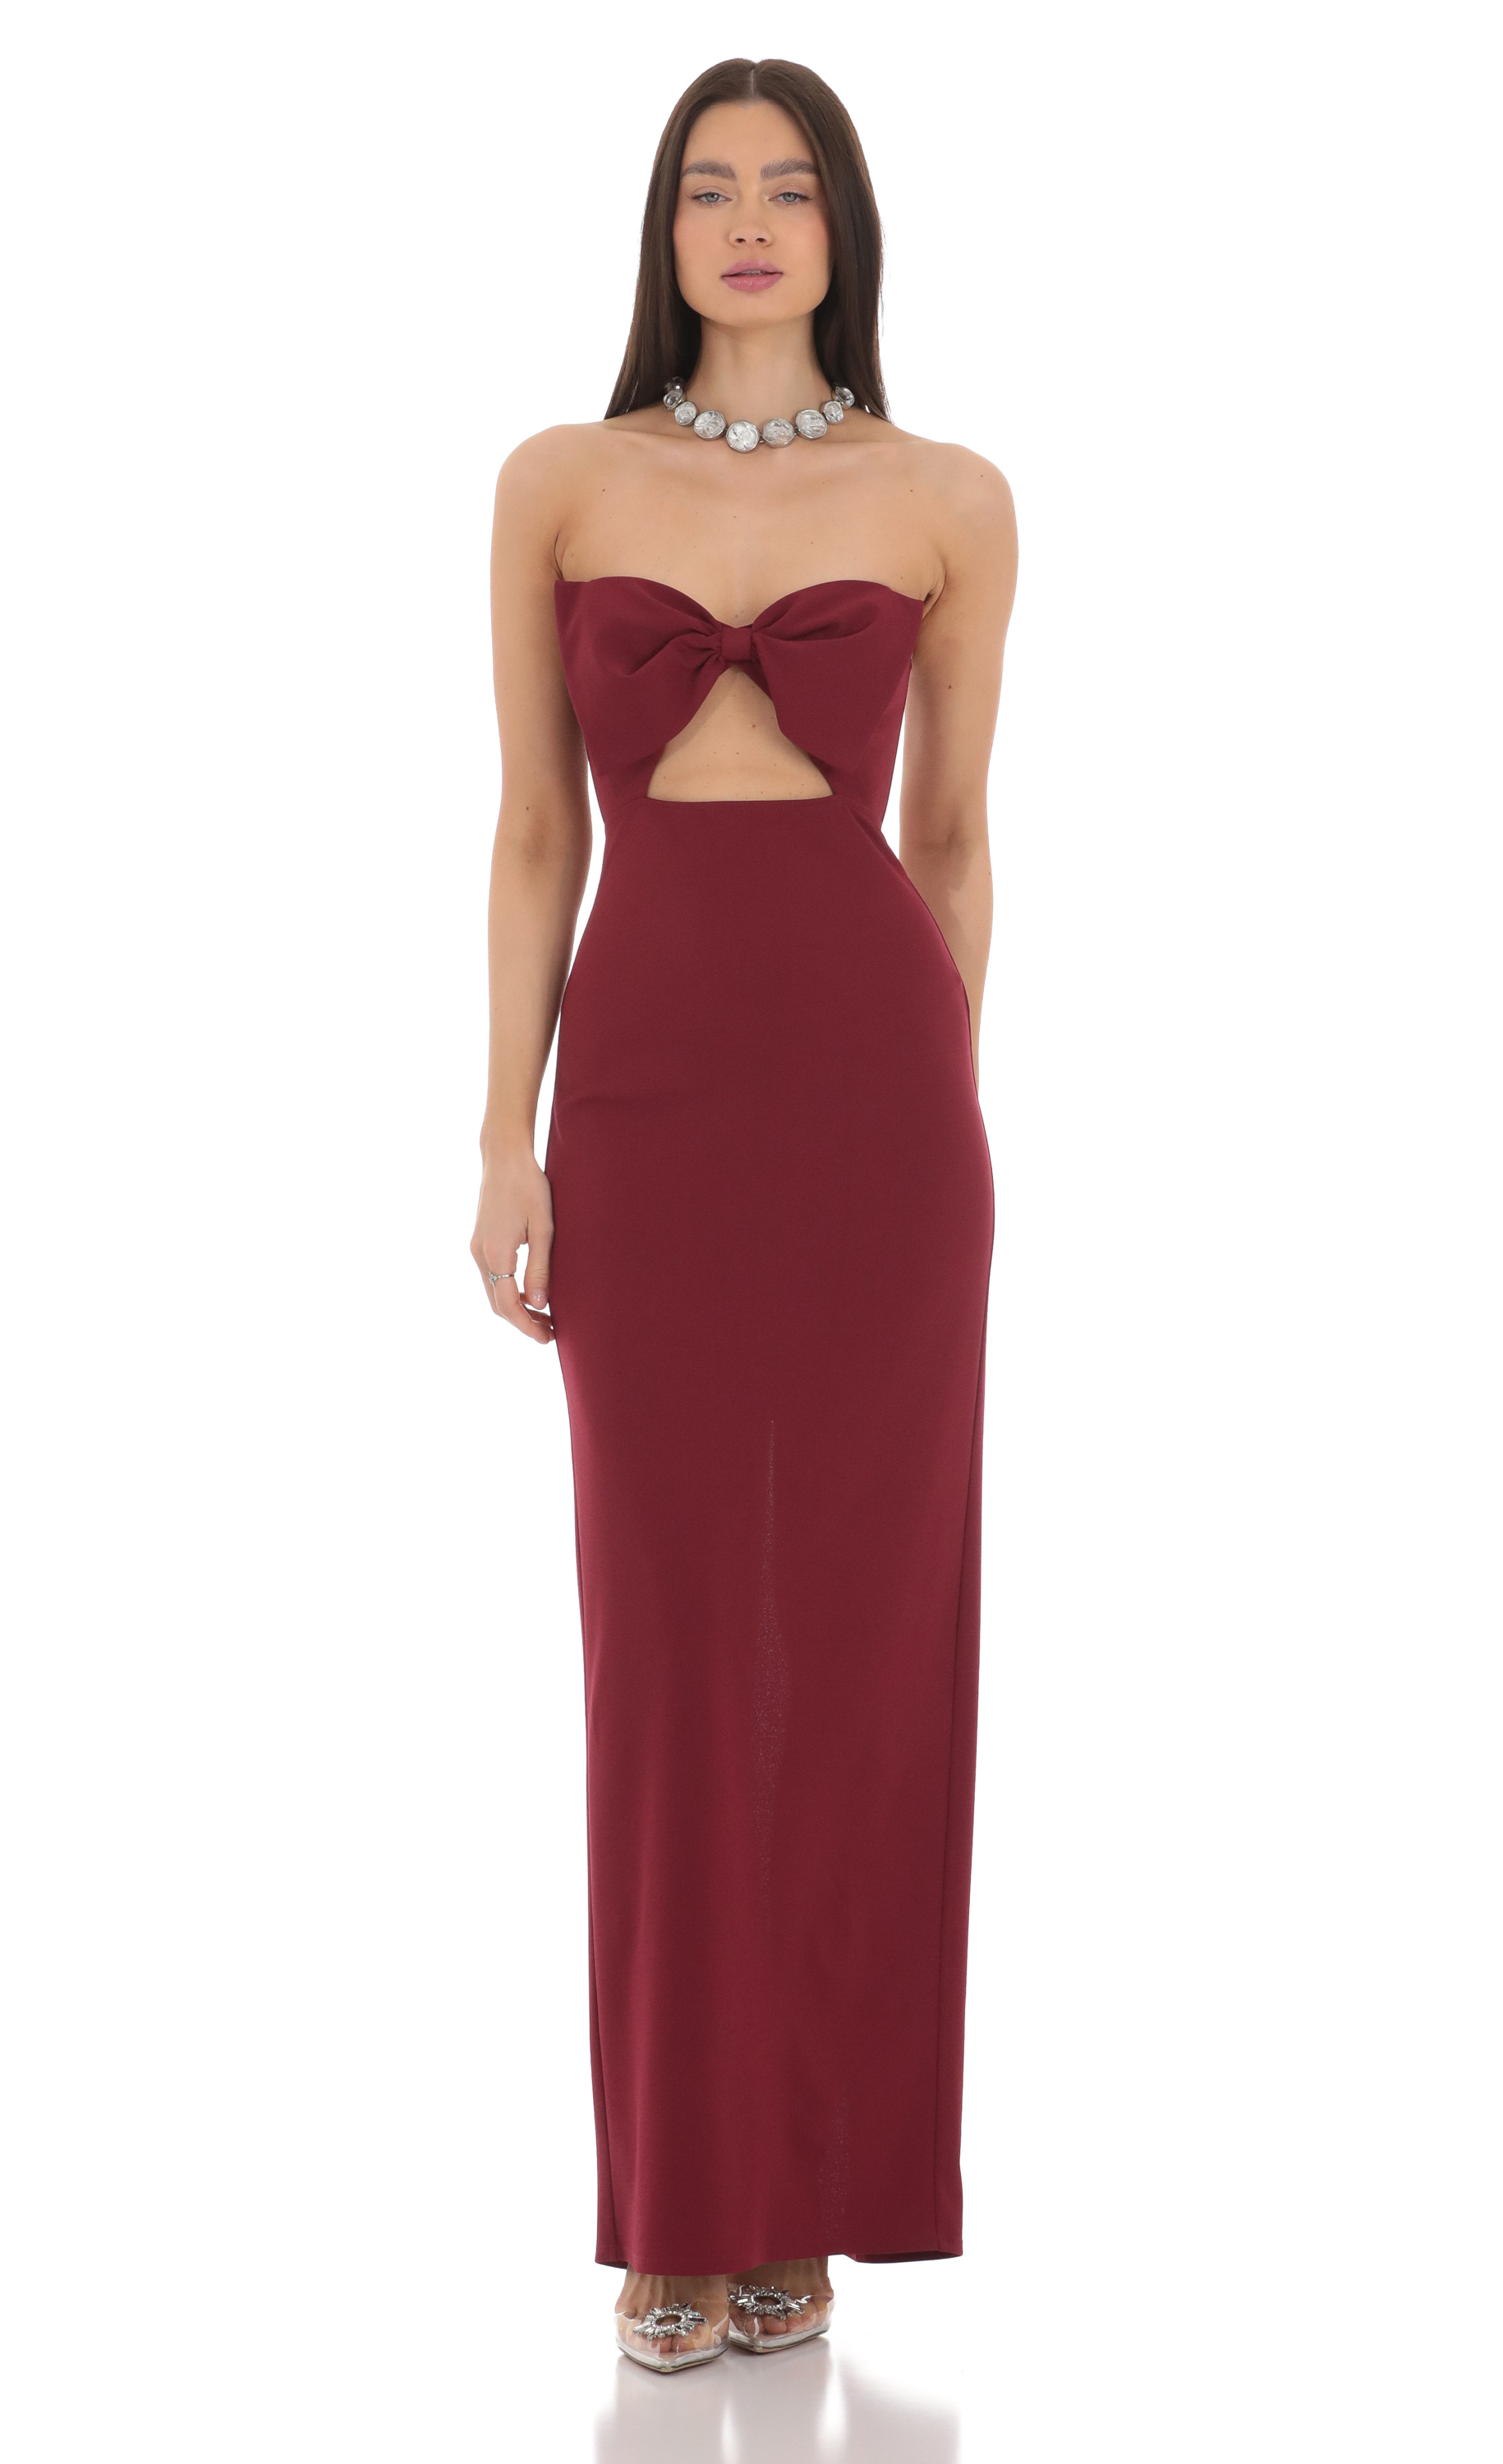 Bow Cutout Strapless Maxi Dress in Maroon